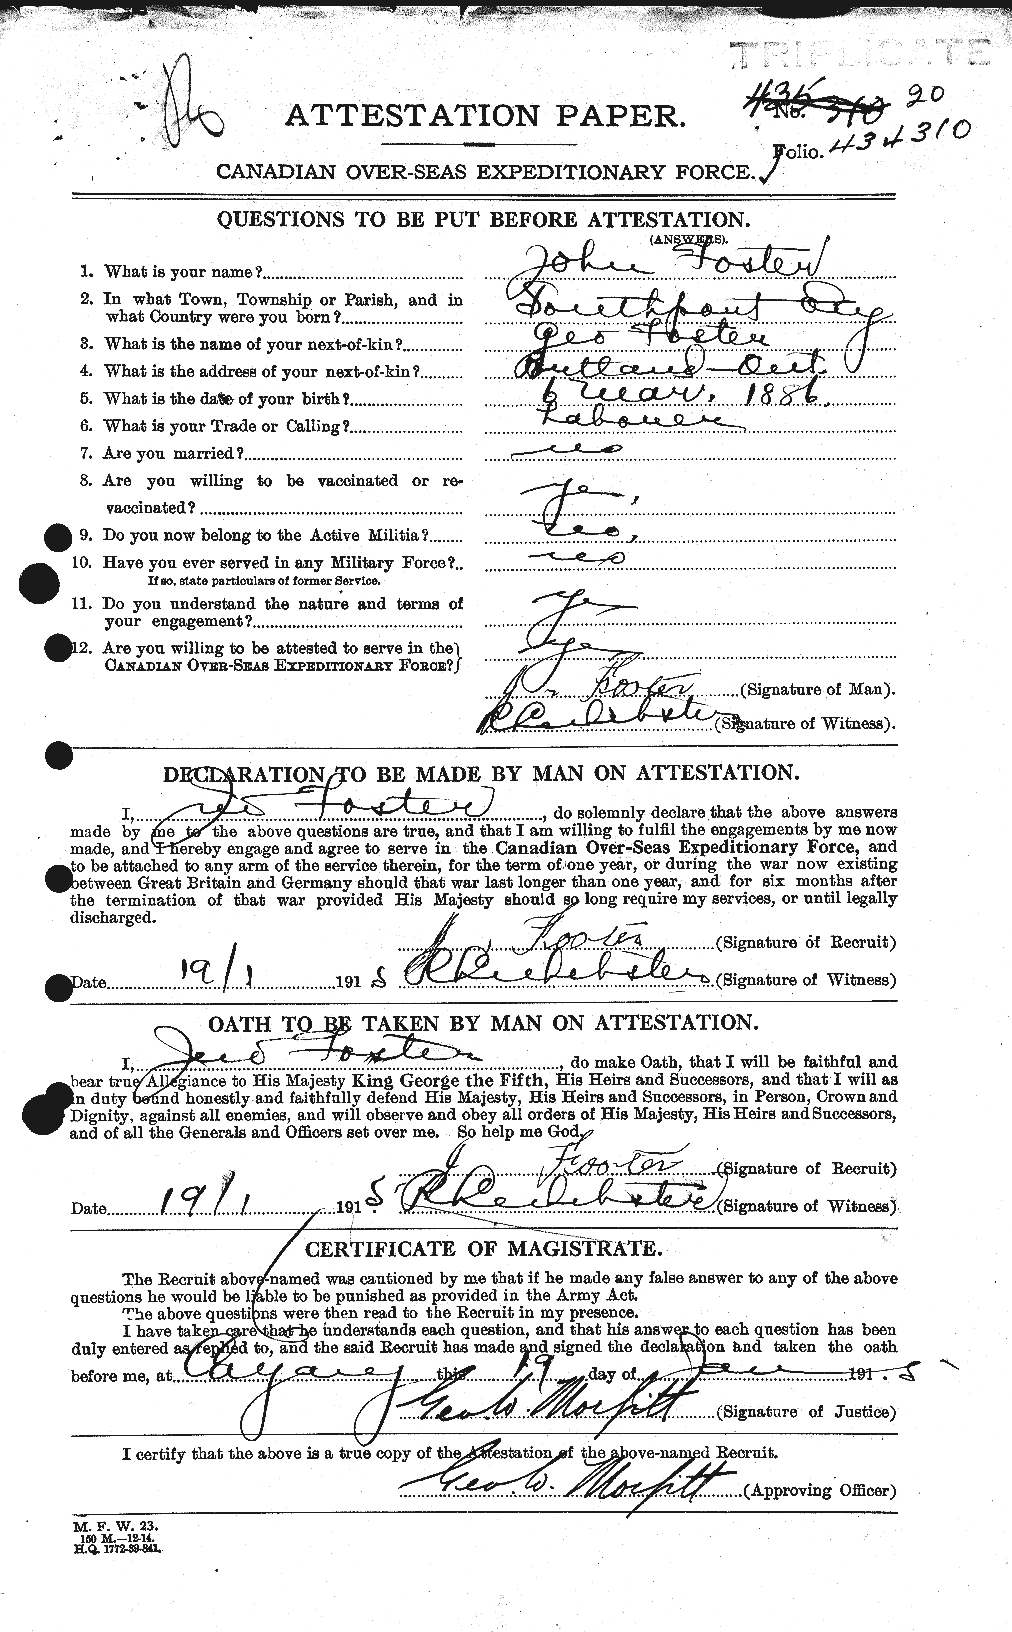 Personnel Records of the First World War - CEF 333344a